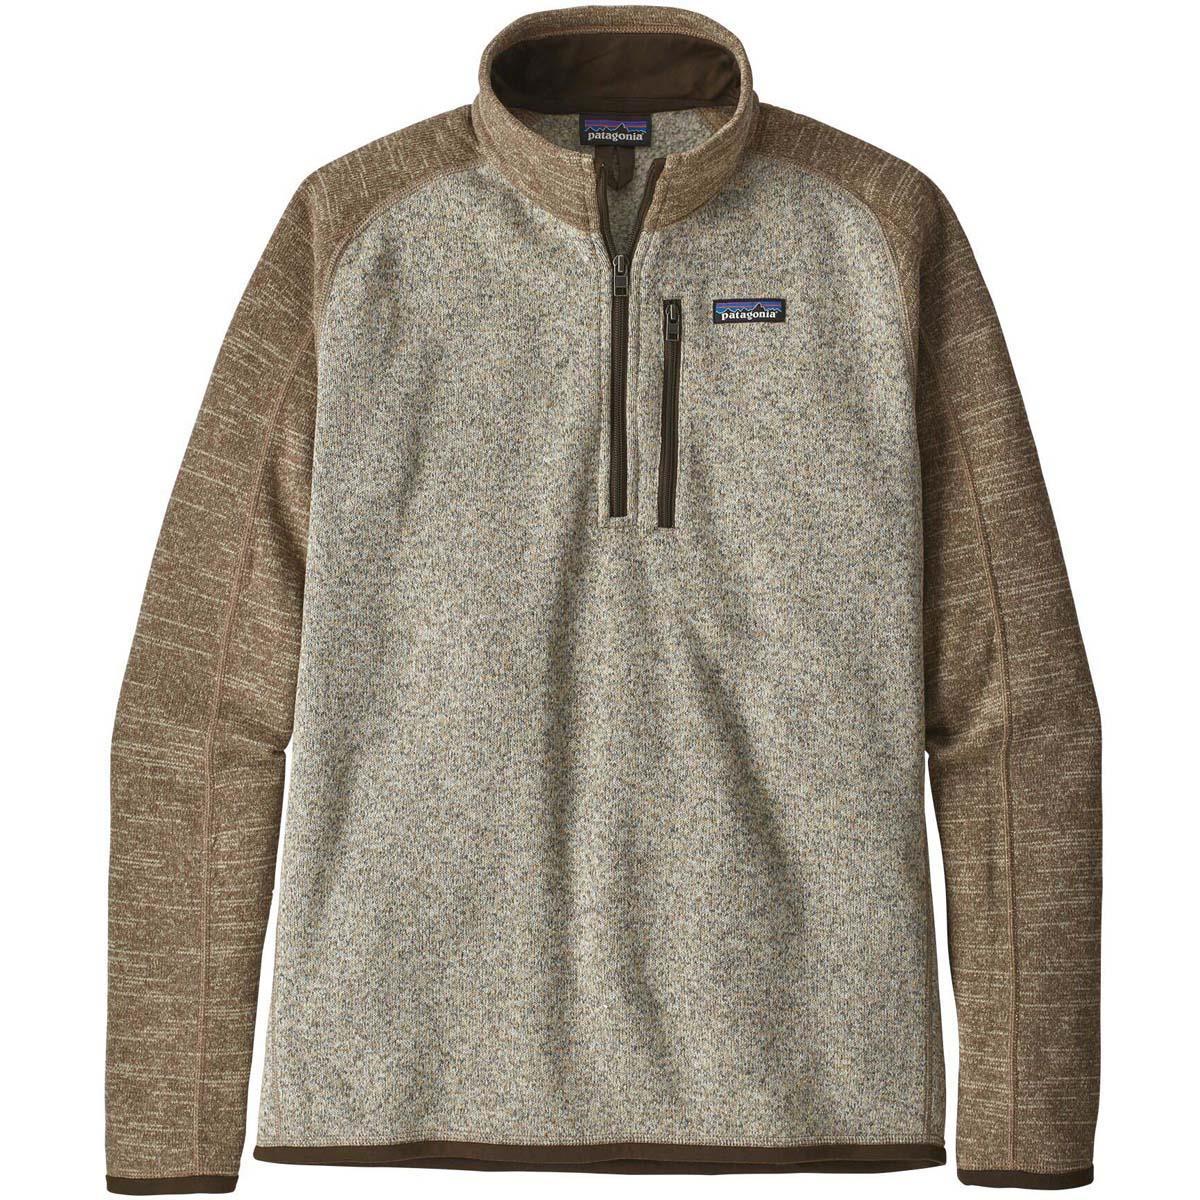 Patagonia Men's Better Sweater 1/4 Zip-MENS CLOTHING-Bleached Stone w/ Pale Khaki-S-Kevin's Fine Outdoor Gear & Apparel